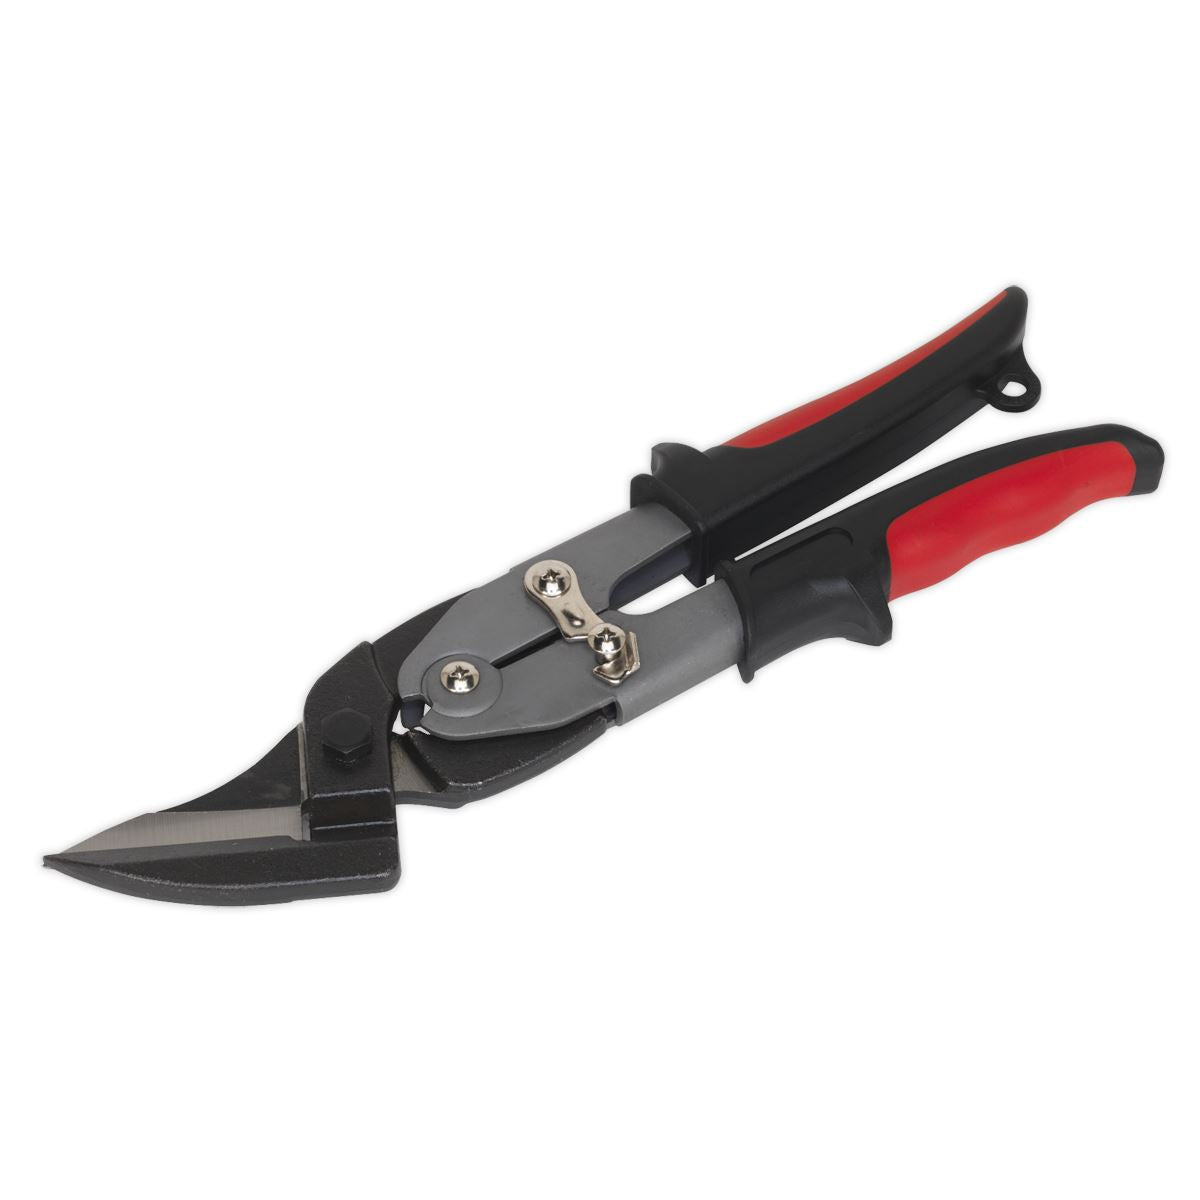 Sealey 280mm Offset Tin Snips 1mm Capacity Stainless Steel Offset Head